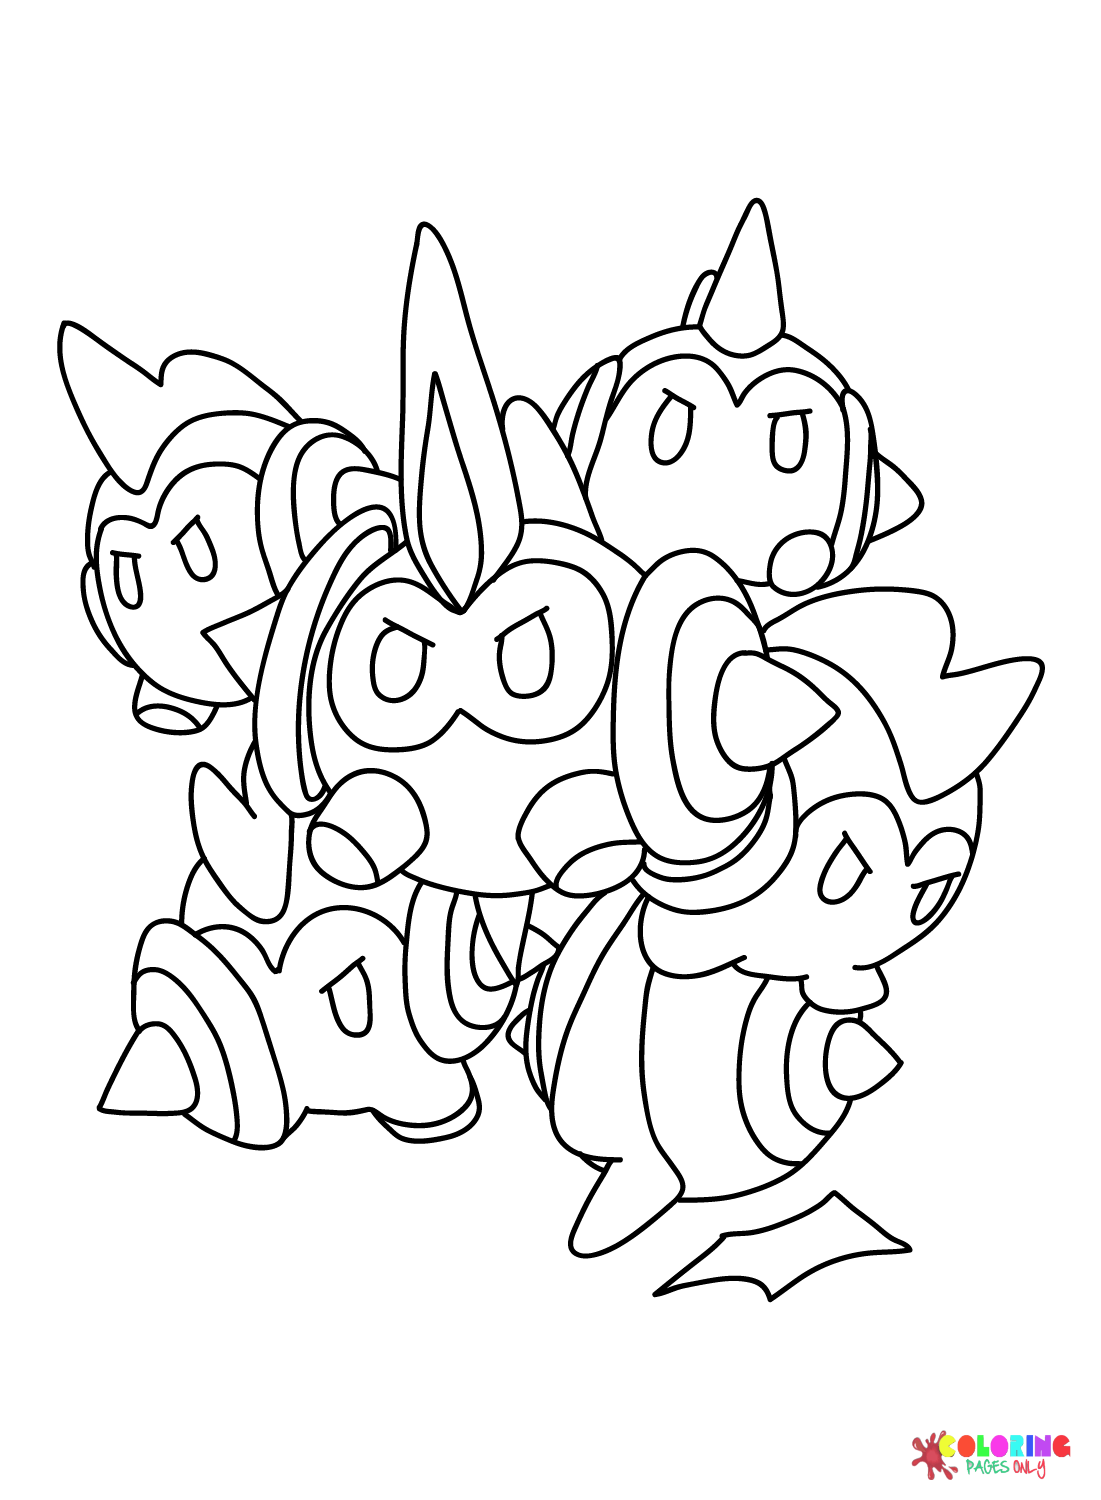 The Falinks Pokemon Coloring Pages Falinks Coloring Pages Disegni